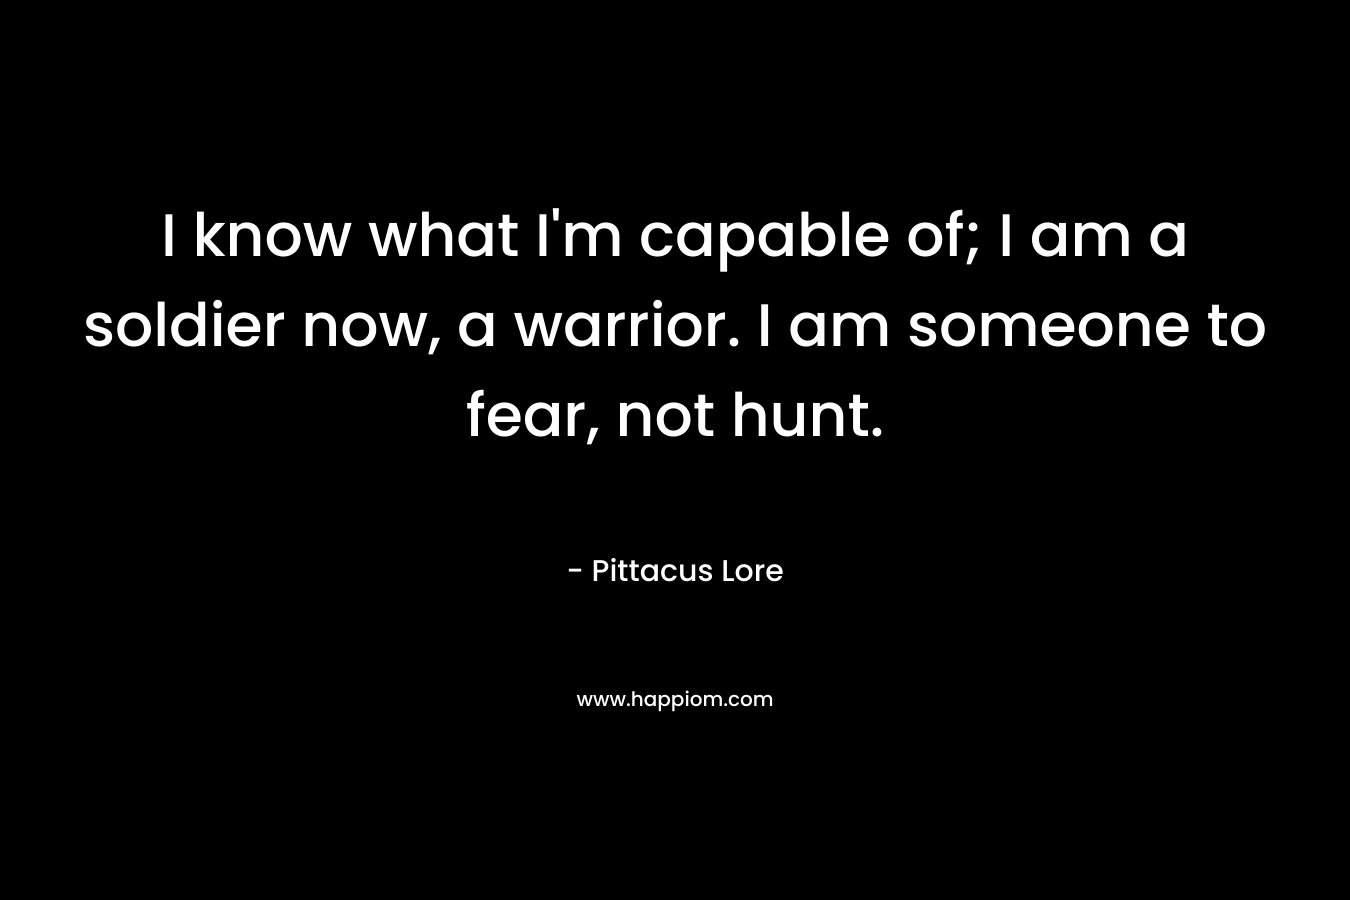 I know what I’m capable of; I am a soldier now, a warrior. I am someone to fear, not hunt. – Pittacus Lore